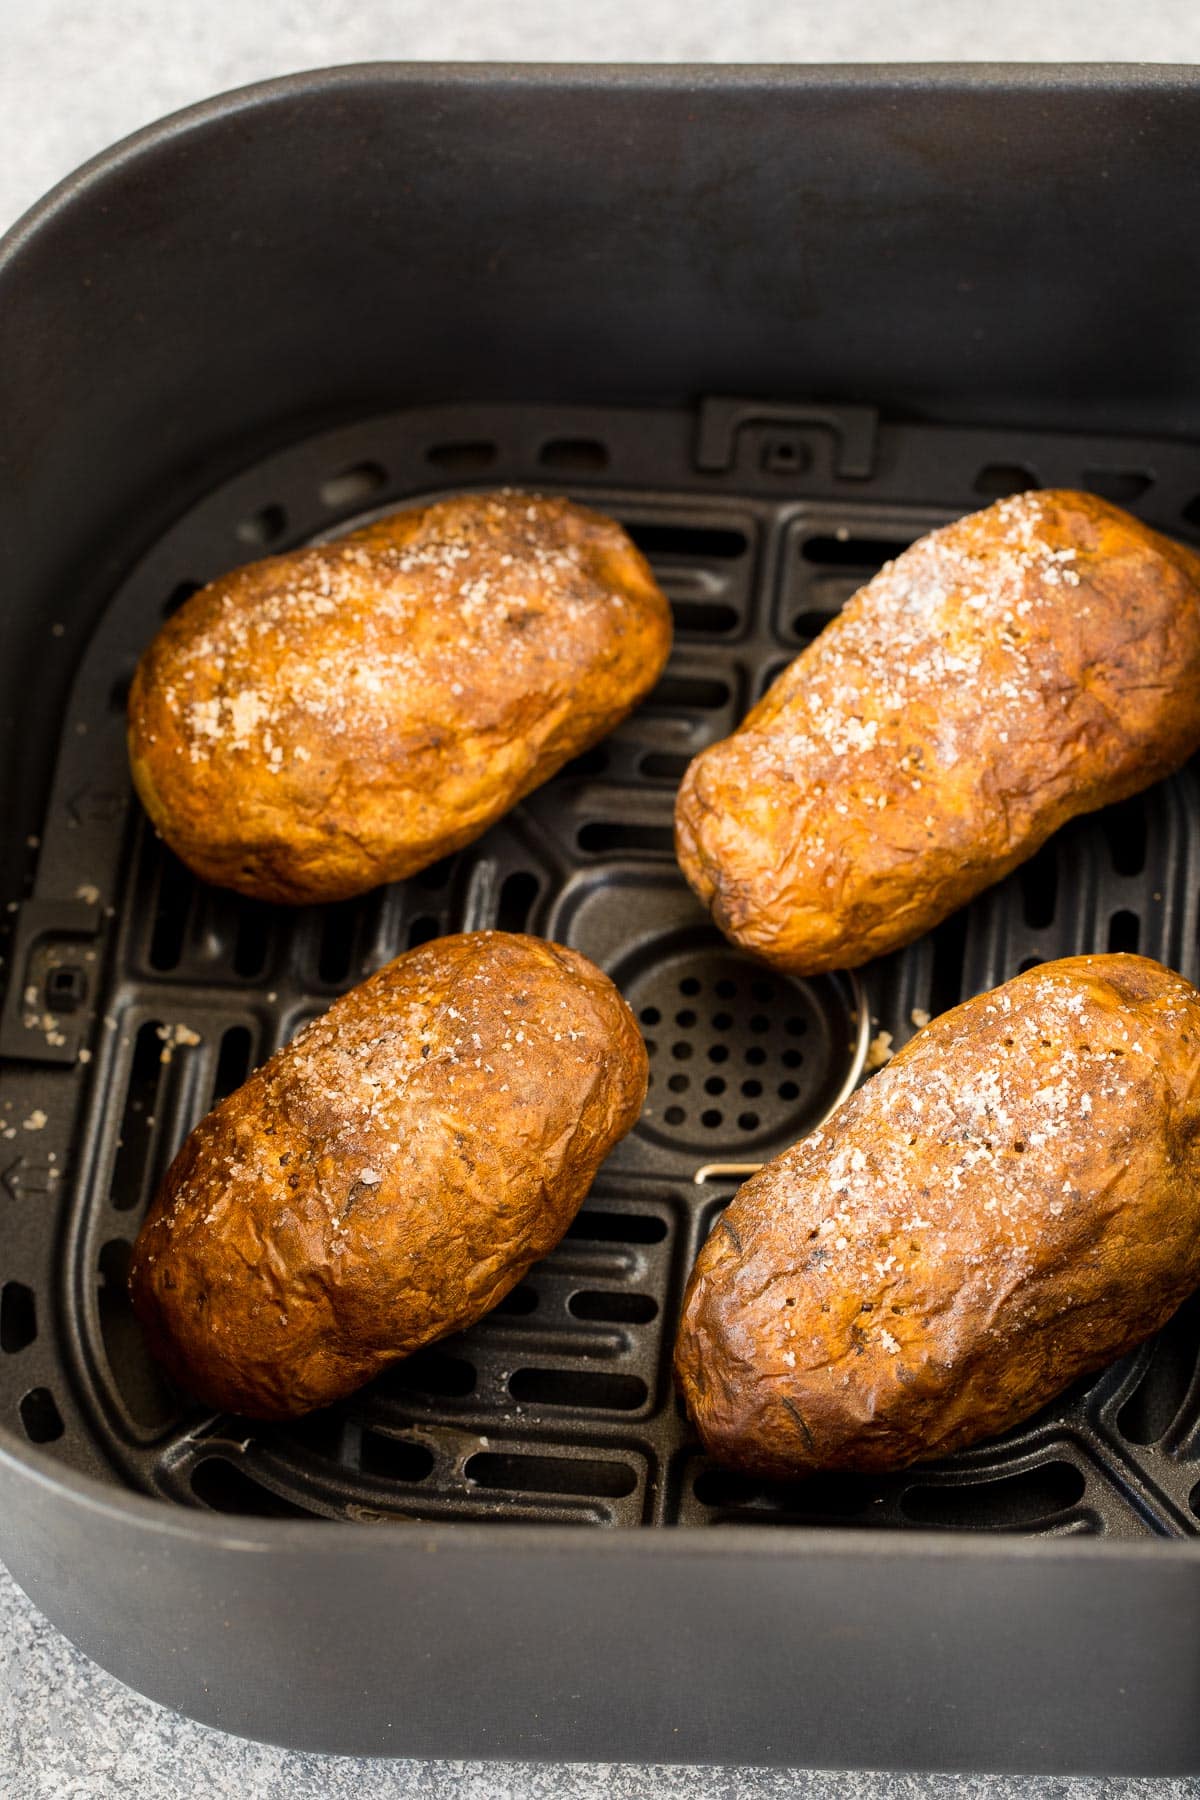 Cooked potatoes in the basket of an air fryer.